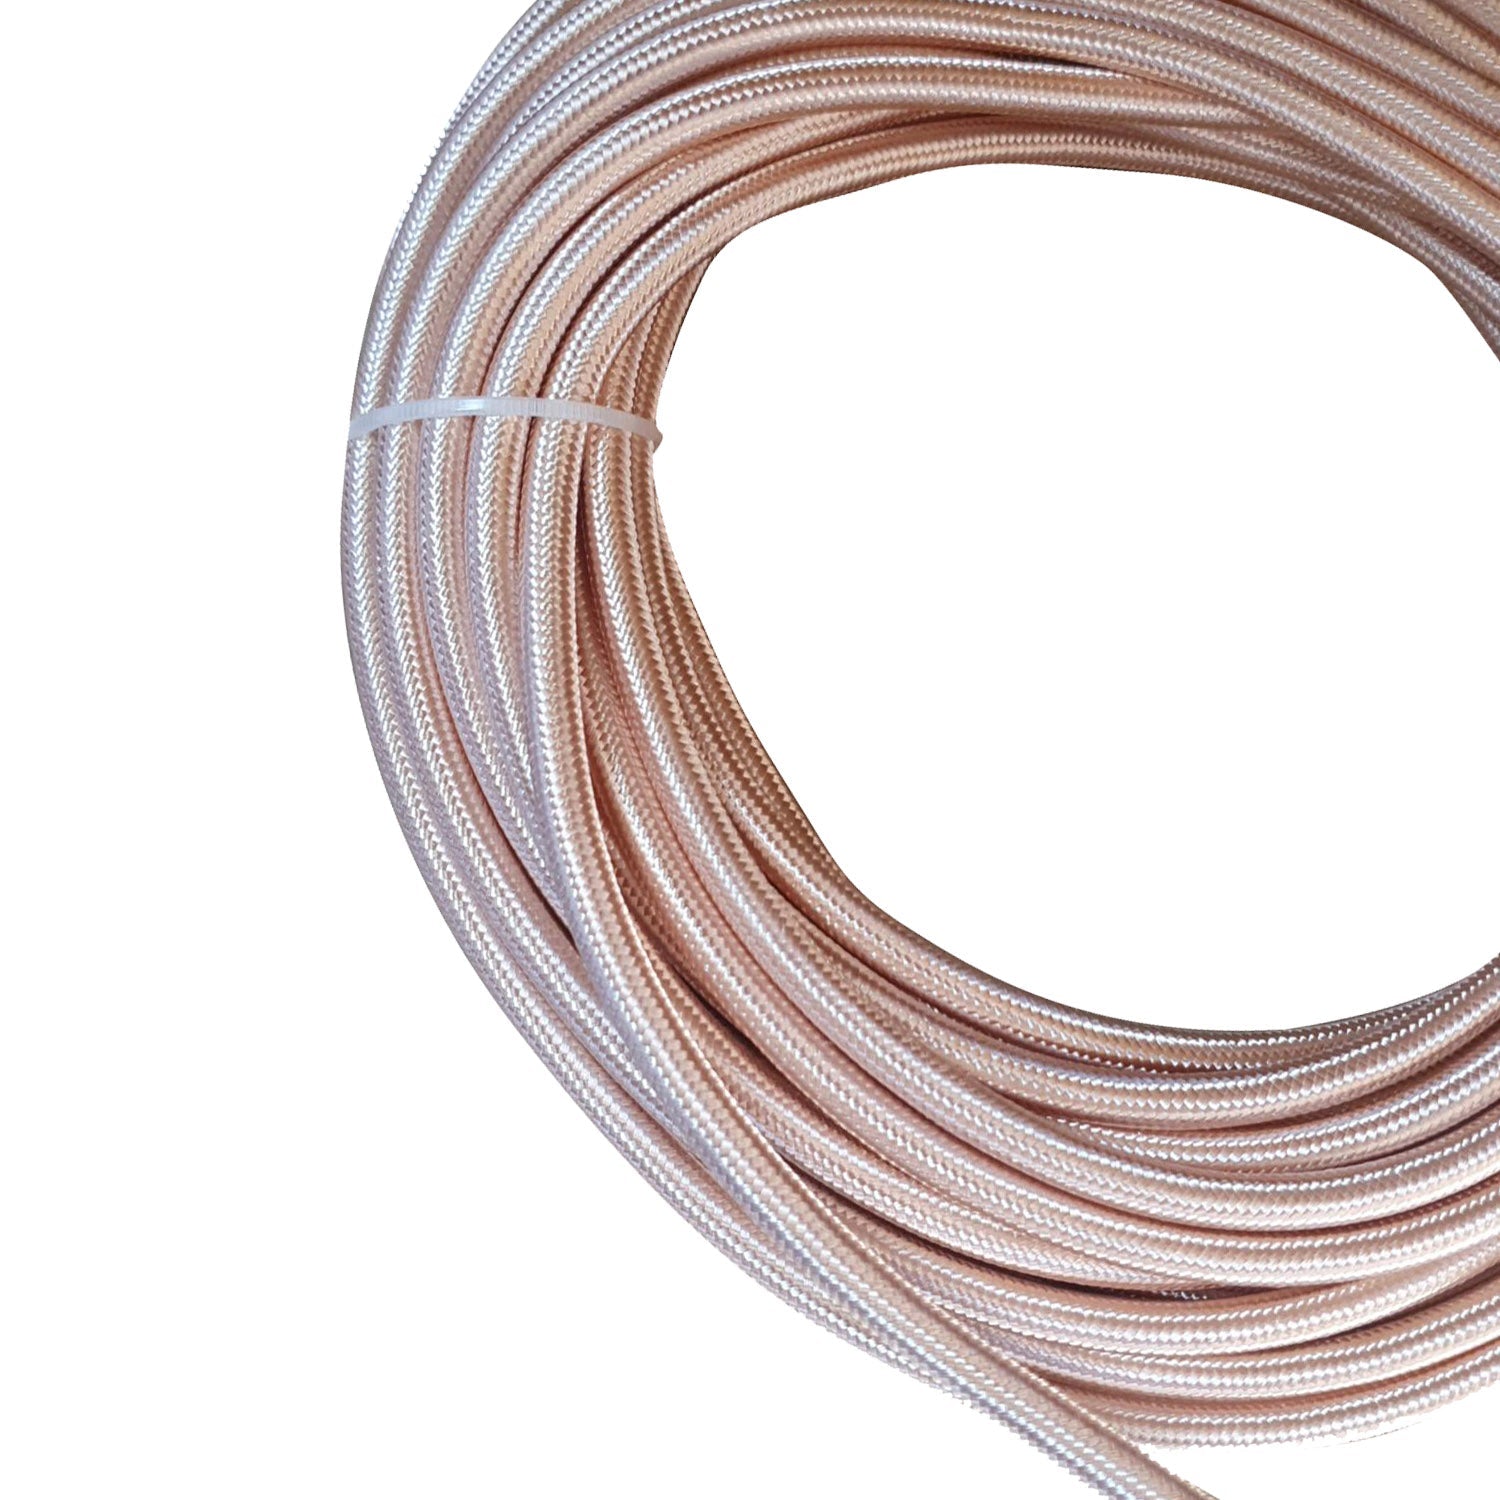 2 core Round Vintage Braided Fabric Rose Gold Coloured Cable Flex